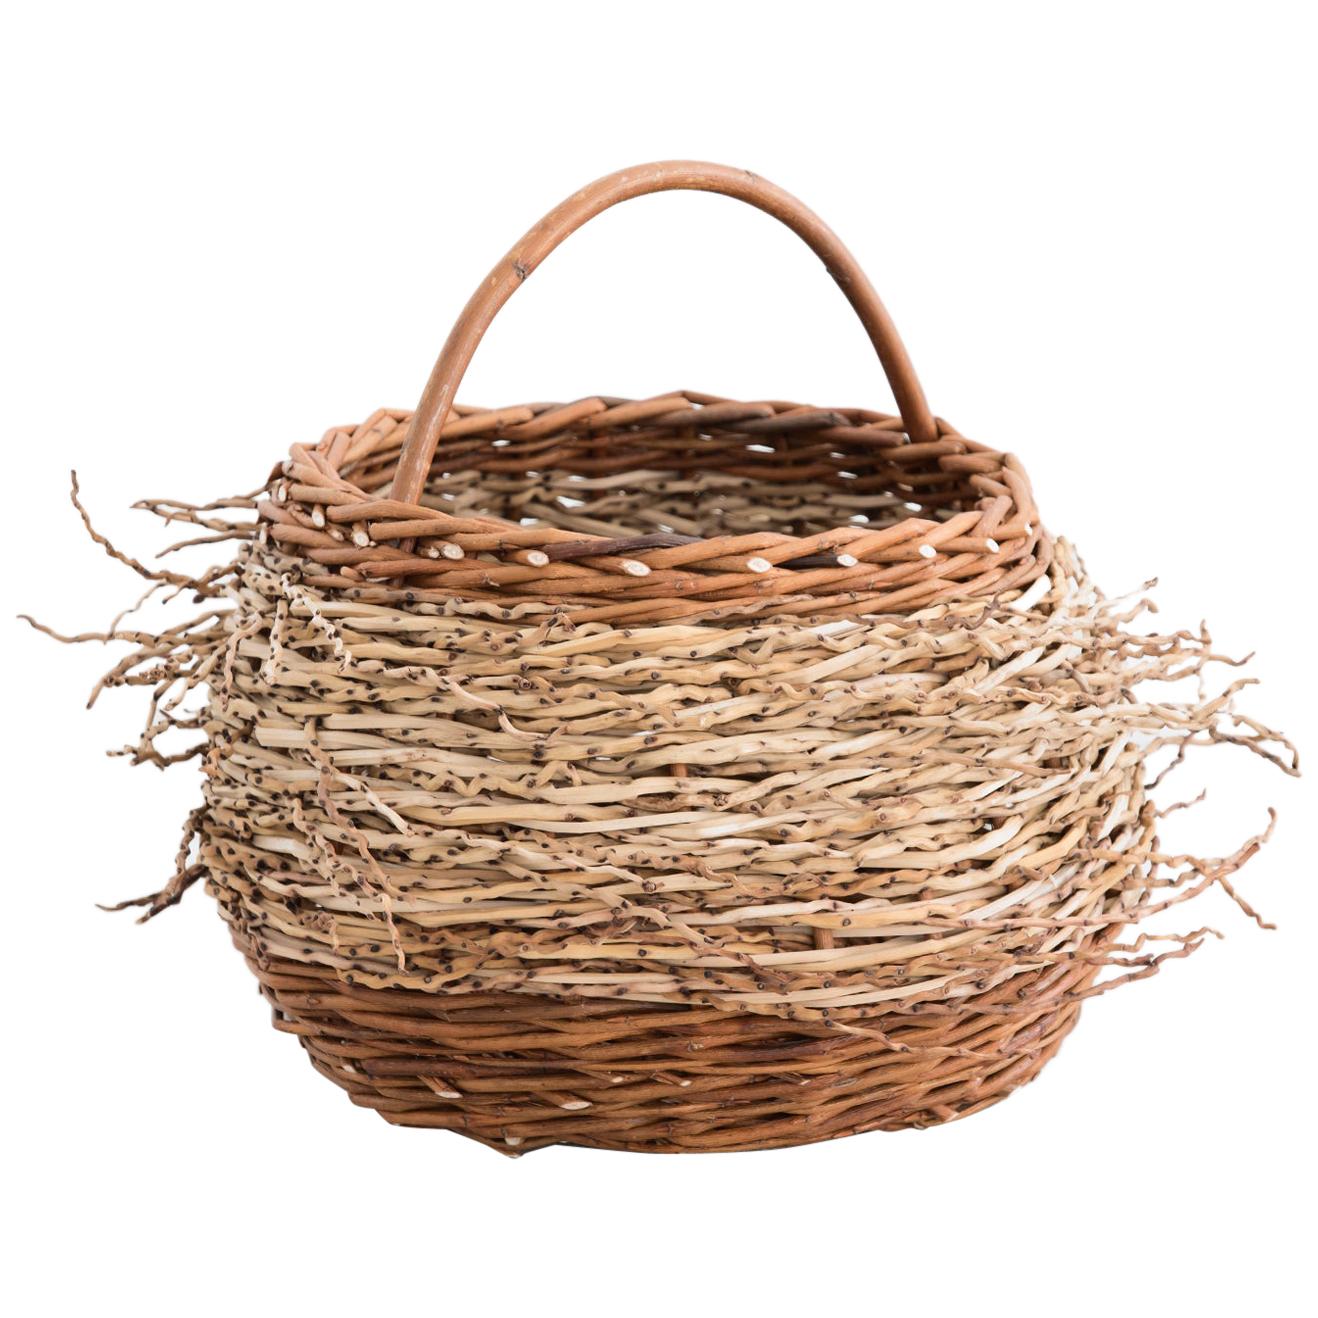 Mónica Guilera Subirana, Willow and Date Palm Contemporary Crafts Basket, 2020